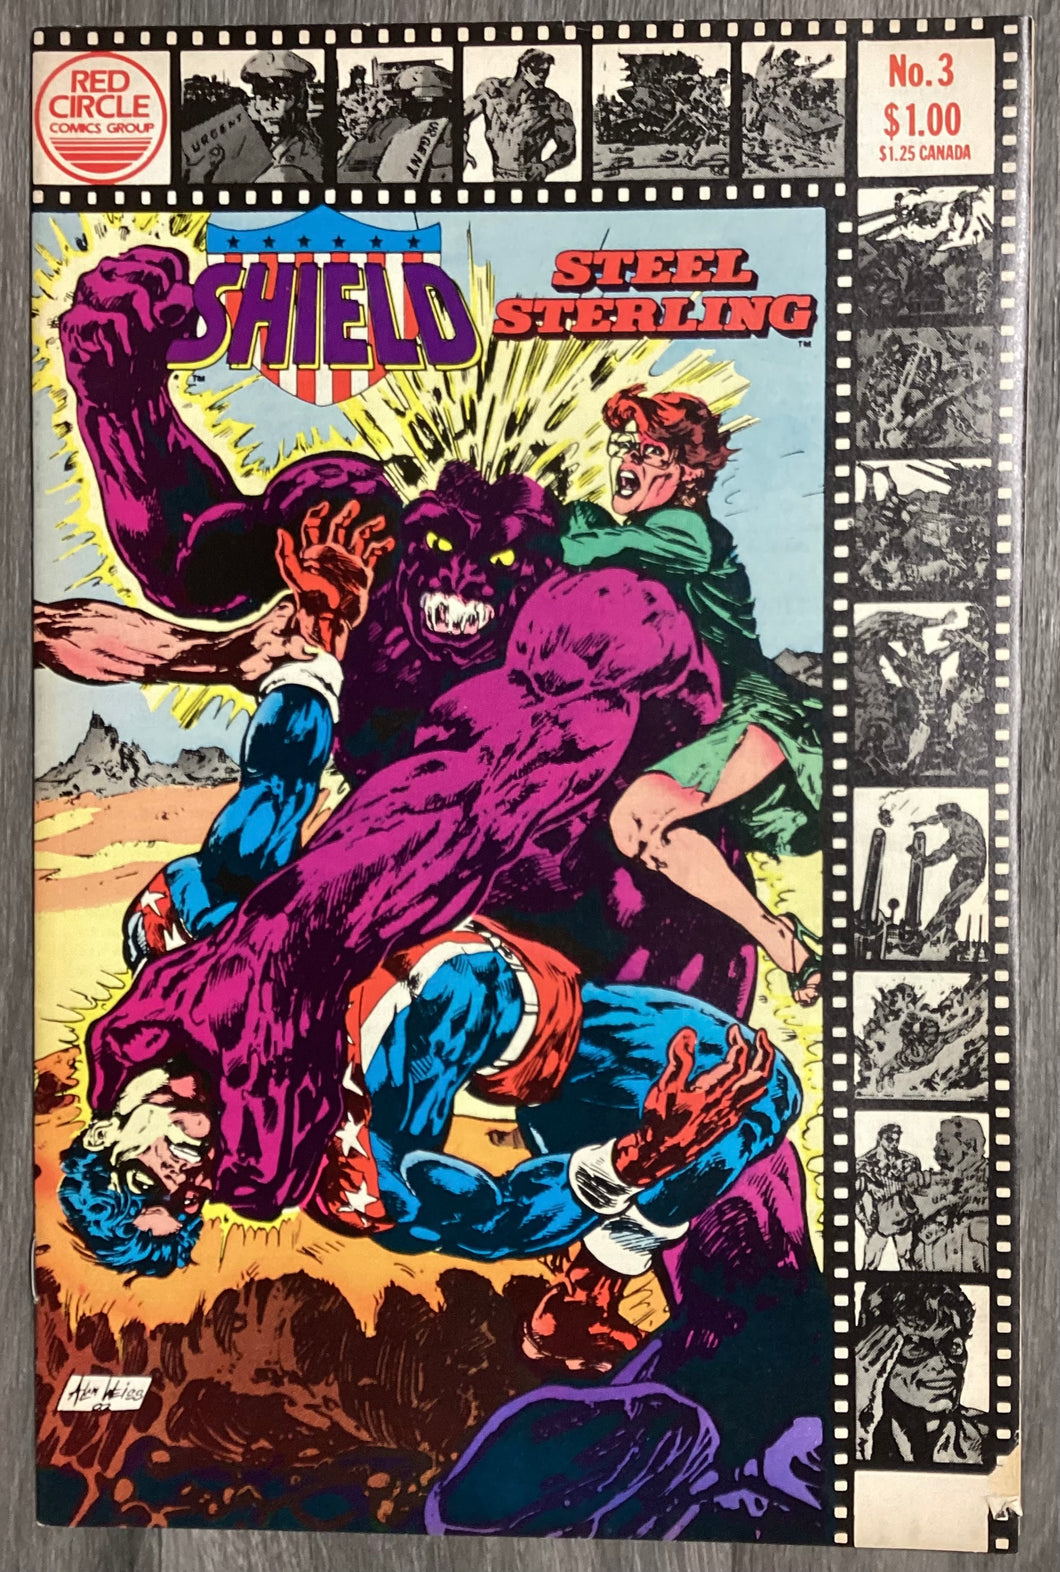 Shield - Steel Stirling No. #3 1983 Red Circle Comics